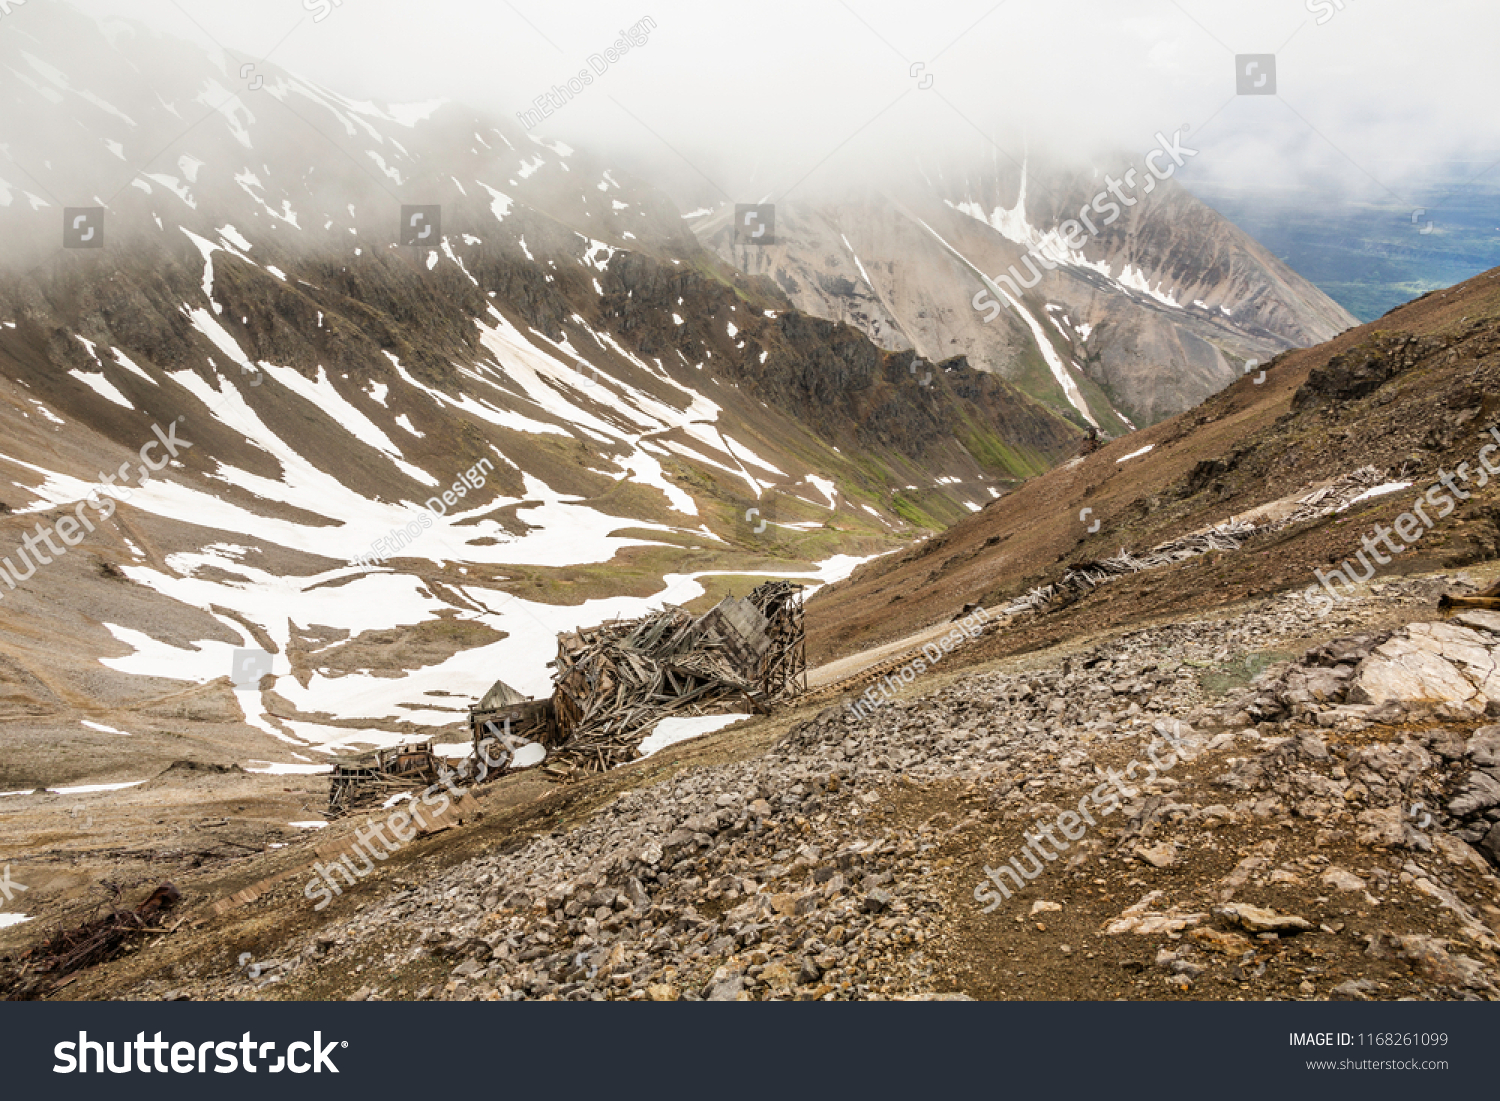 The ruins of the old Bonanza Mine precariously sit high in the mountains above Kennecott on a scree slop. Wrangell St Elias National park, Alaska. #1168261099